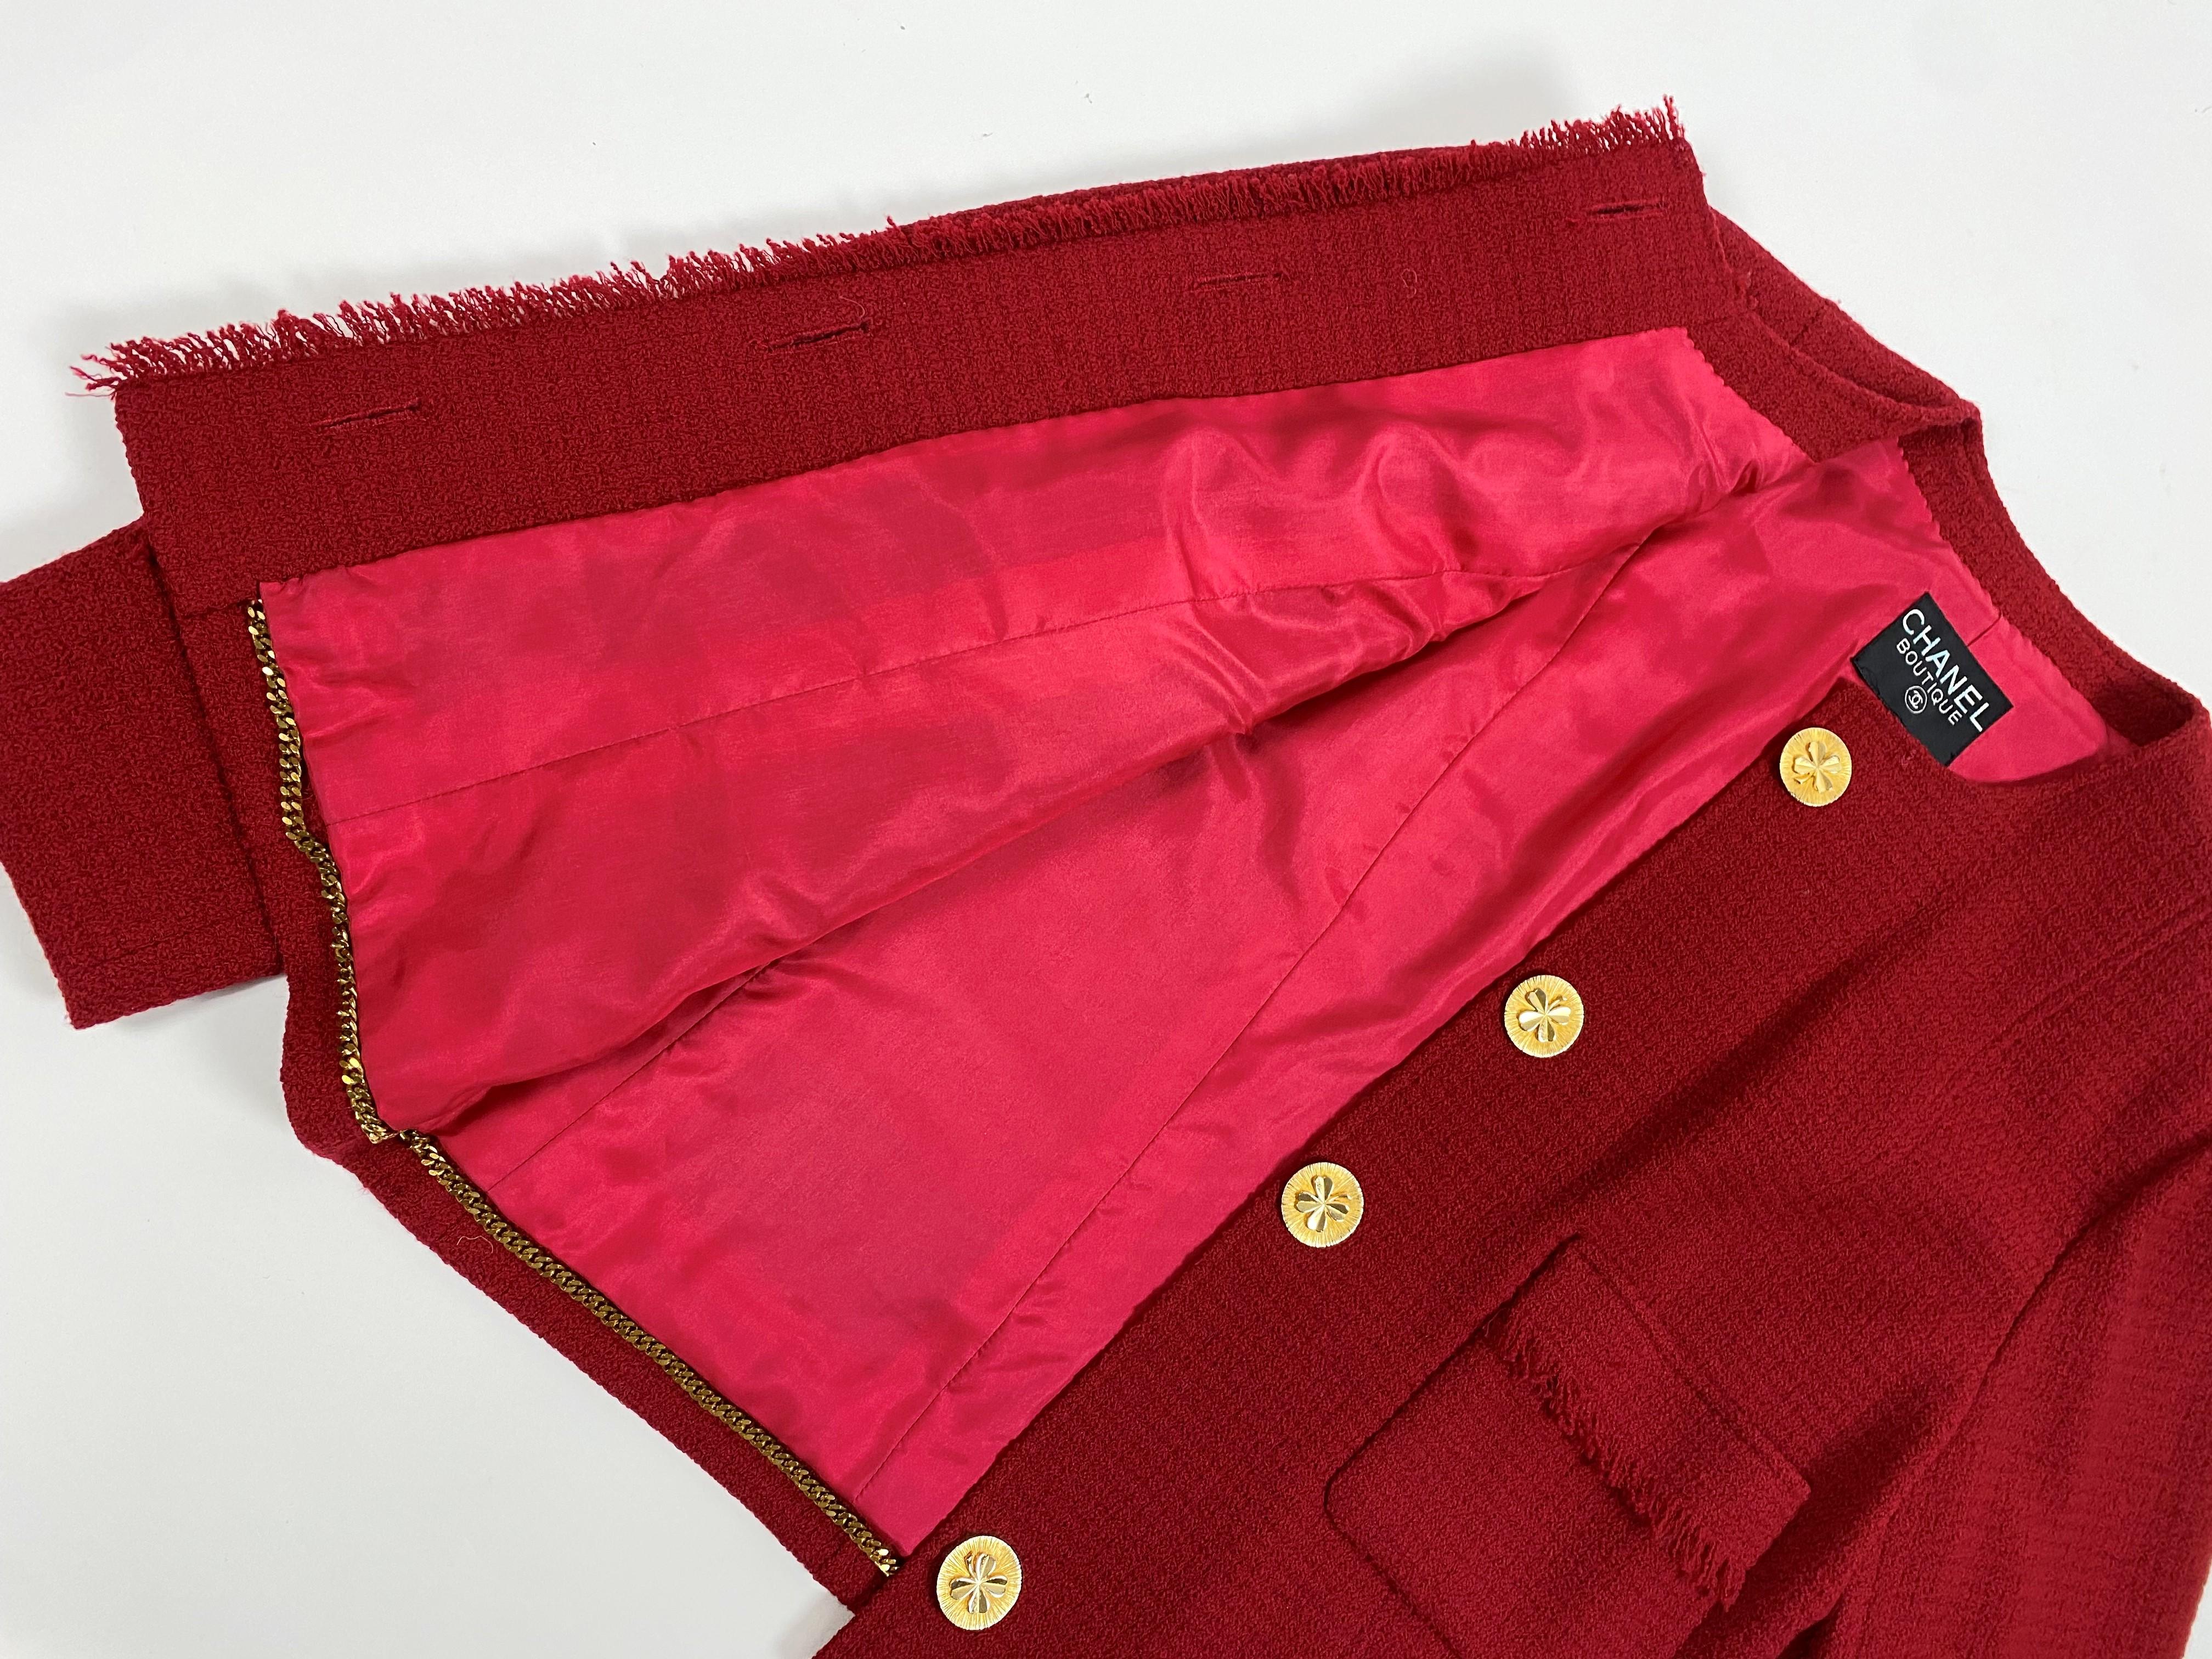 A Chanel - Karl Lagerfeld Red Mohair Wool Jacket Circa 1995-2000 For Sale 8